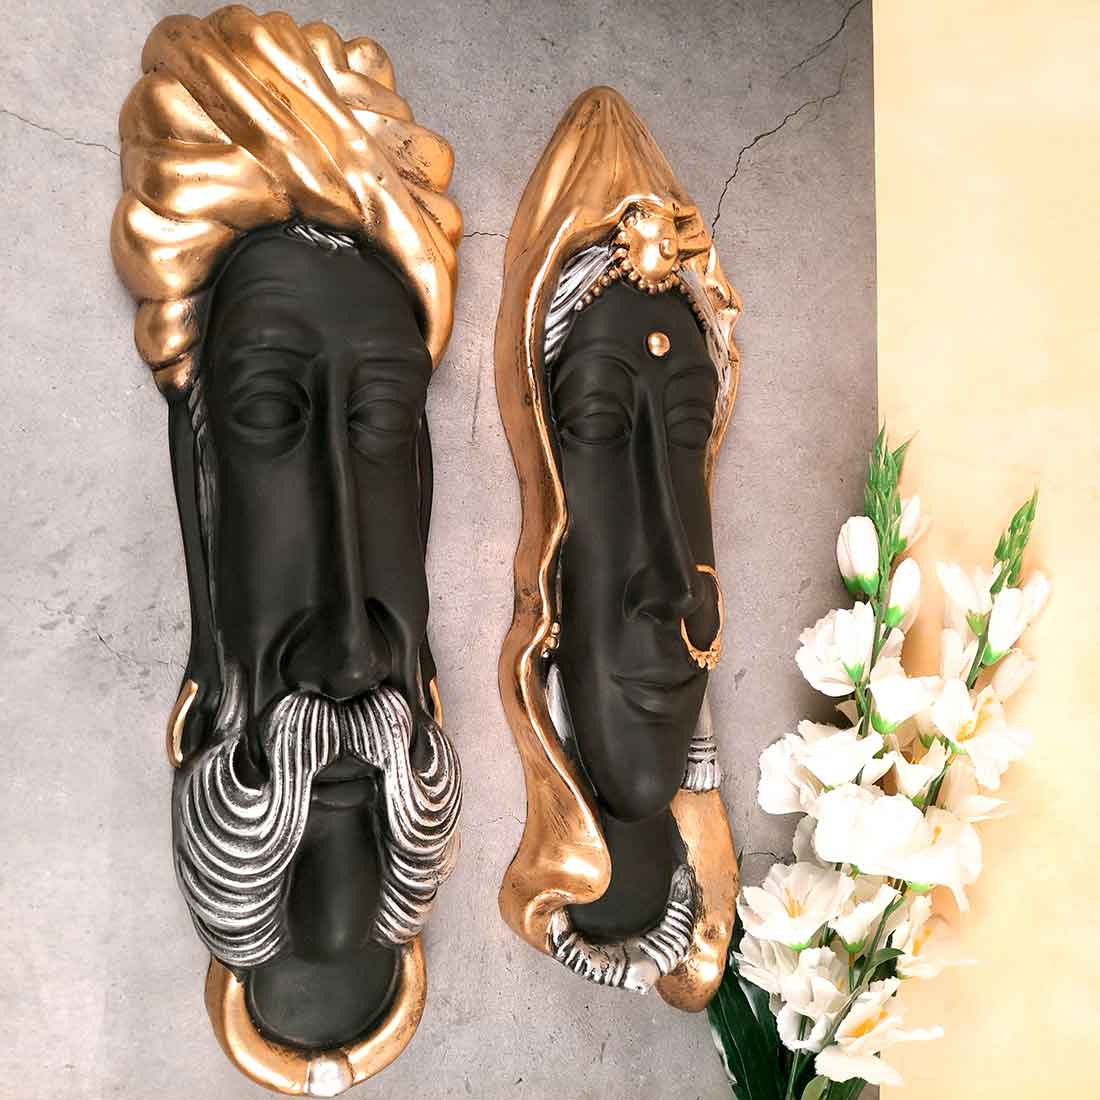 Traditional Man & Woman Face Wall Hanging - For Home, Wall Decor & Gifts - 23 Inch - Apkamart #Color_Black